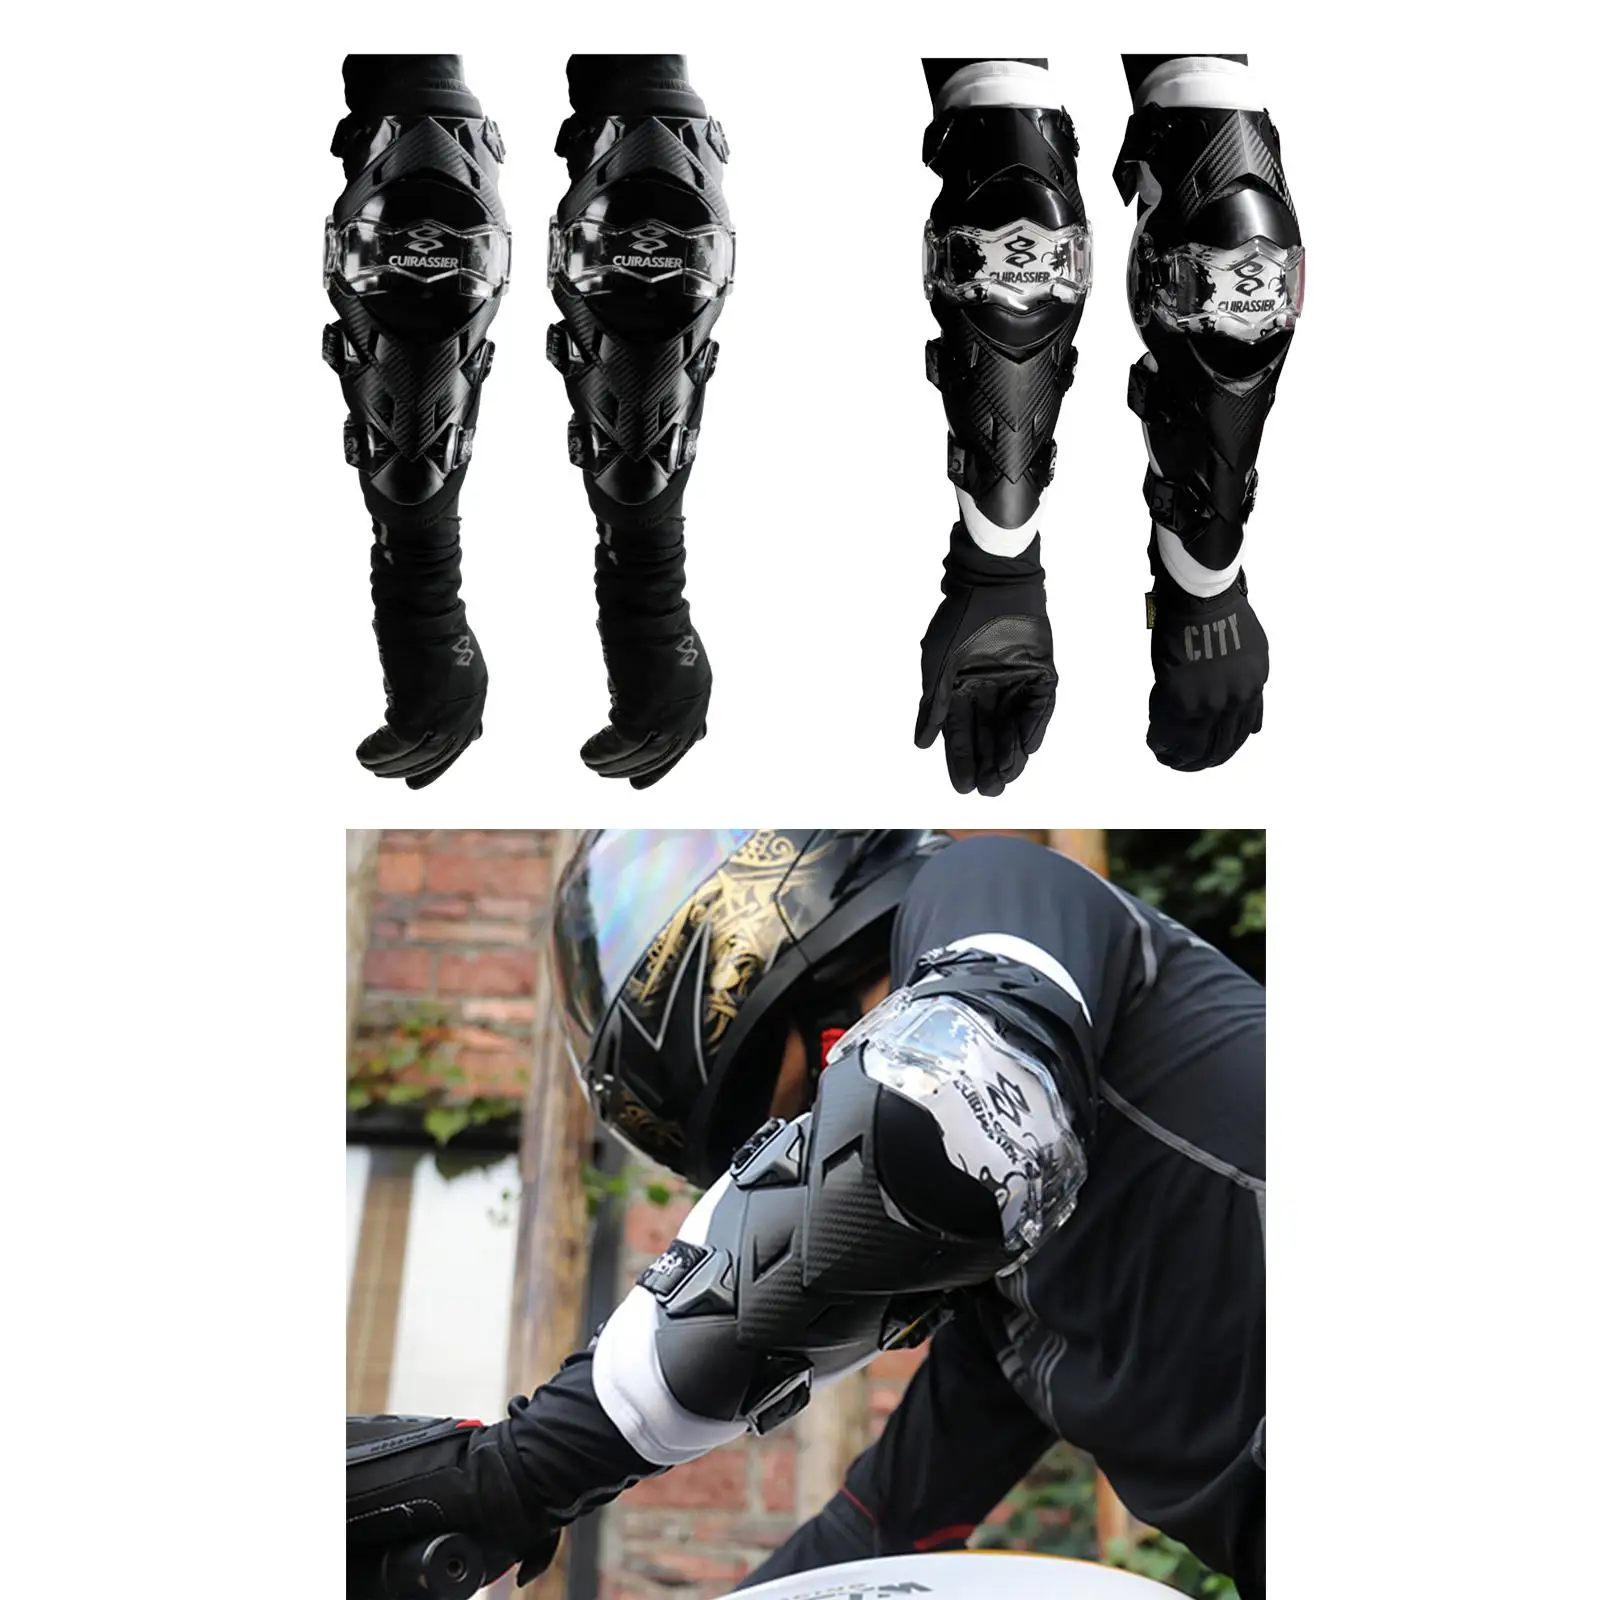 Motorcycle Elbow Protector,Cuirassier Elbow Pads E09 Motocross Off-Road Racing Downhill Dirt Bike Protection Elbow Guards Black